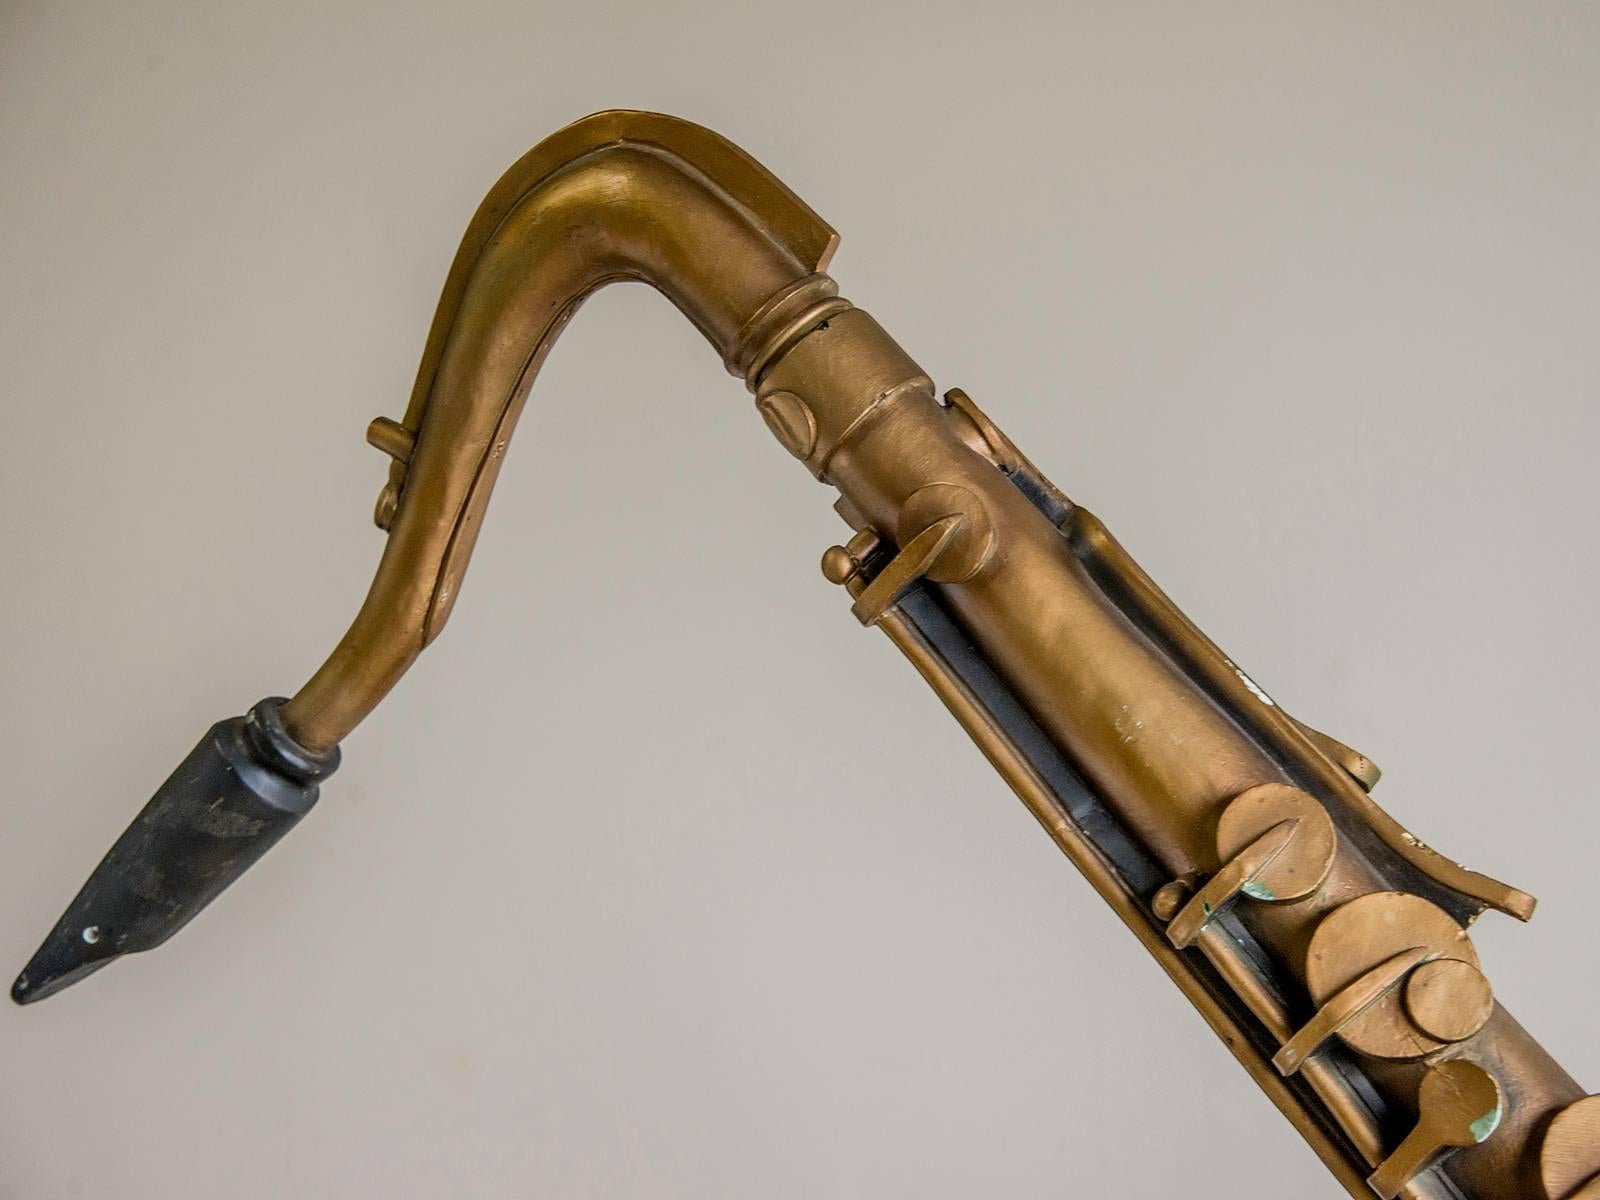 Be the first to see our new arrivals directly through 1stdibs! Please click follow dealer below. 

An enormous saxophone originally from a music store in Paris, France, circa 1940. Please look at the giant scale of this store prop made to suspend